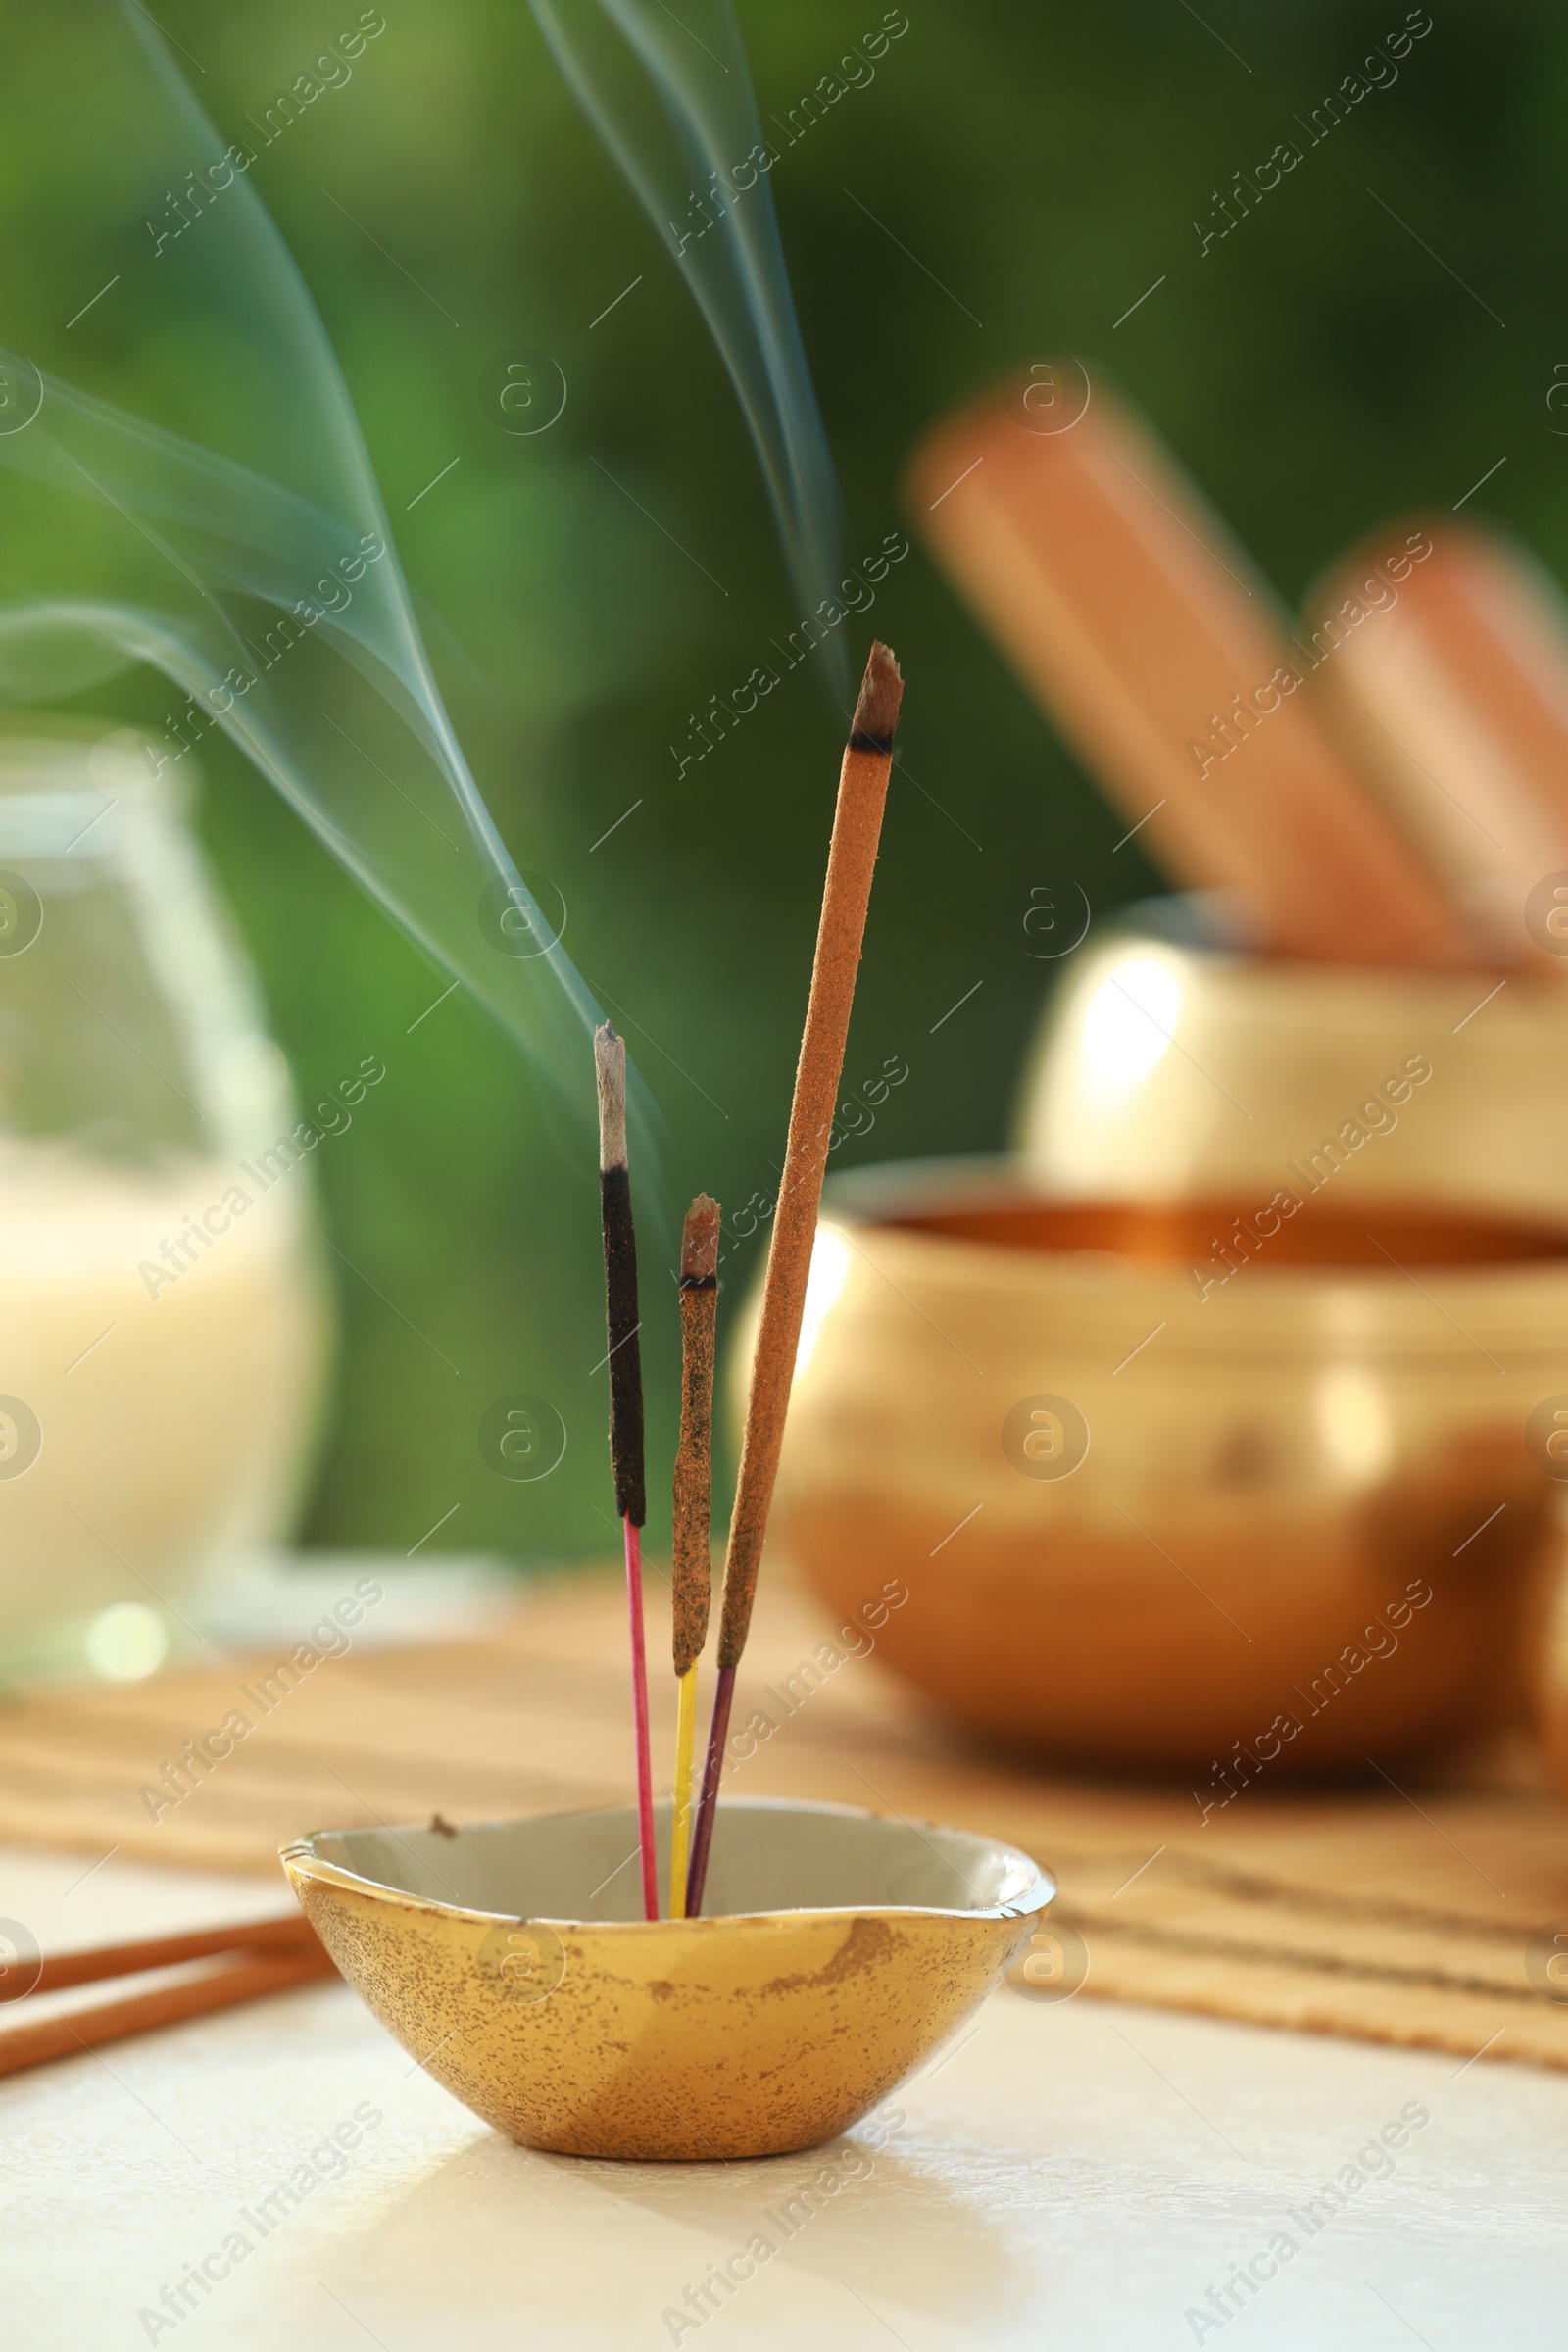 Photo of Incense sticks smoldering in holder, Tibetan singing bowl and candle on light table outdoors